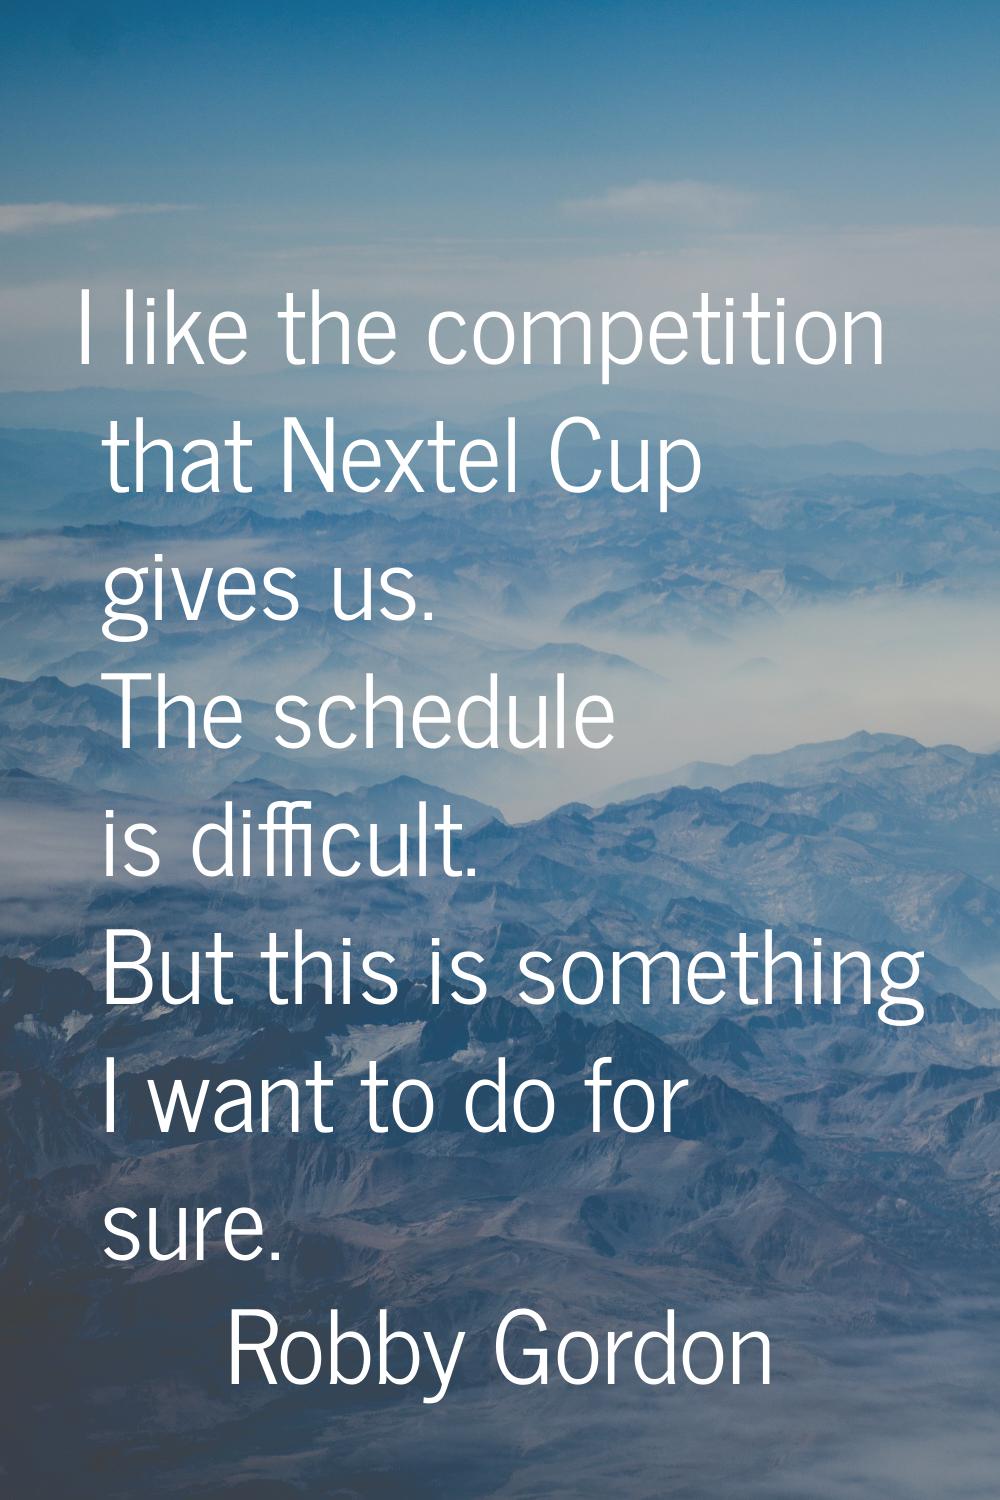 I like the competition that Nextel Cup gives us. The schedule is difficult. But this is something I